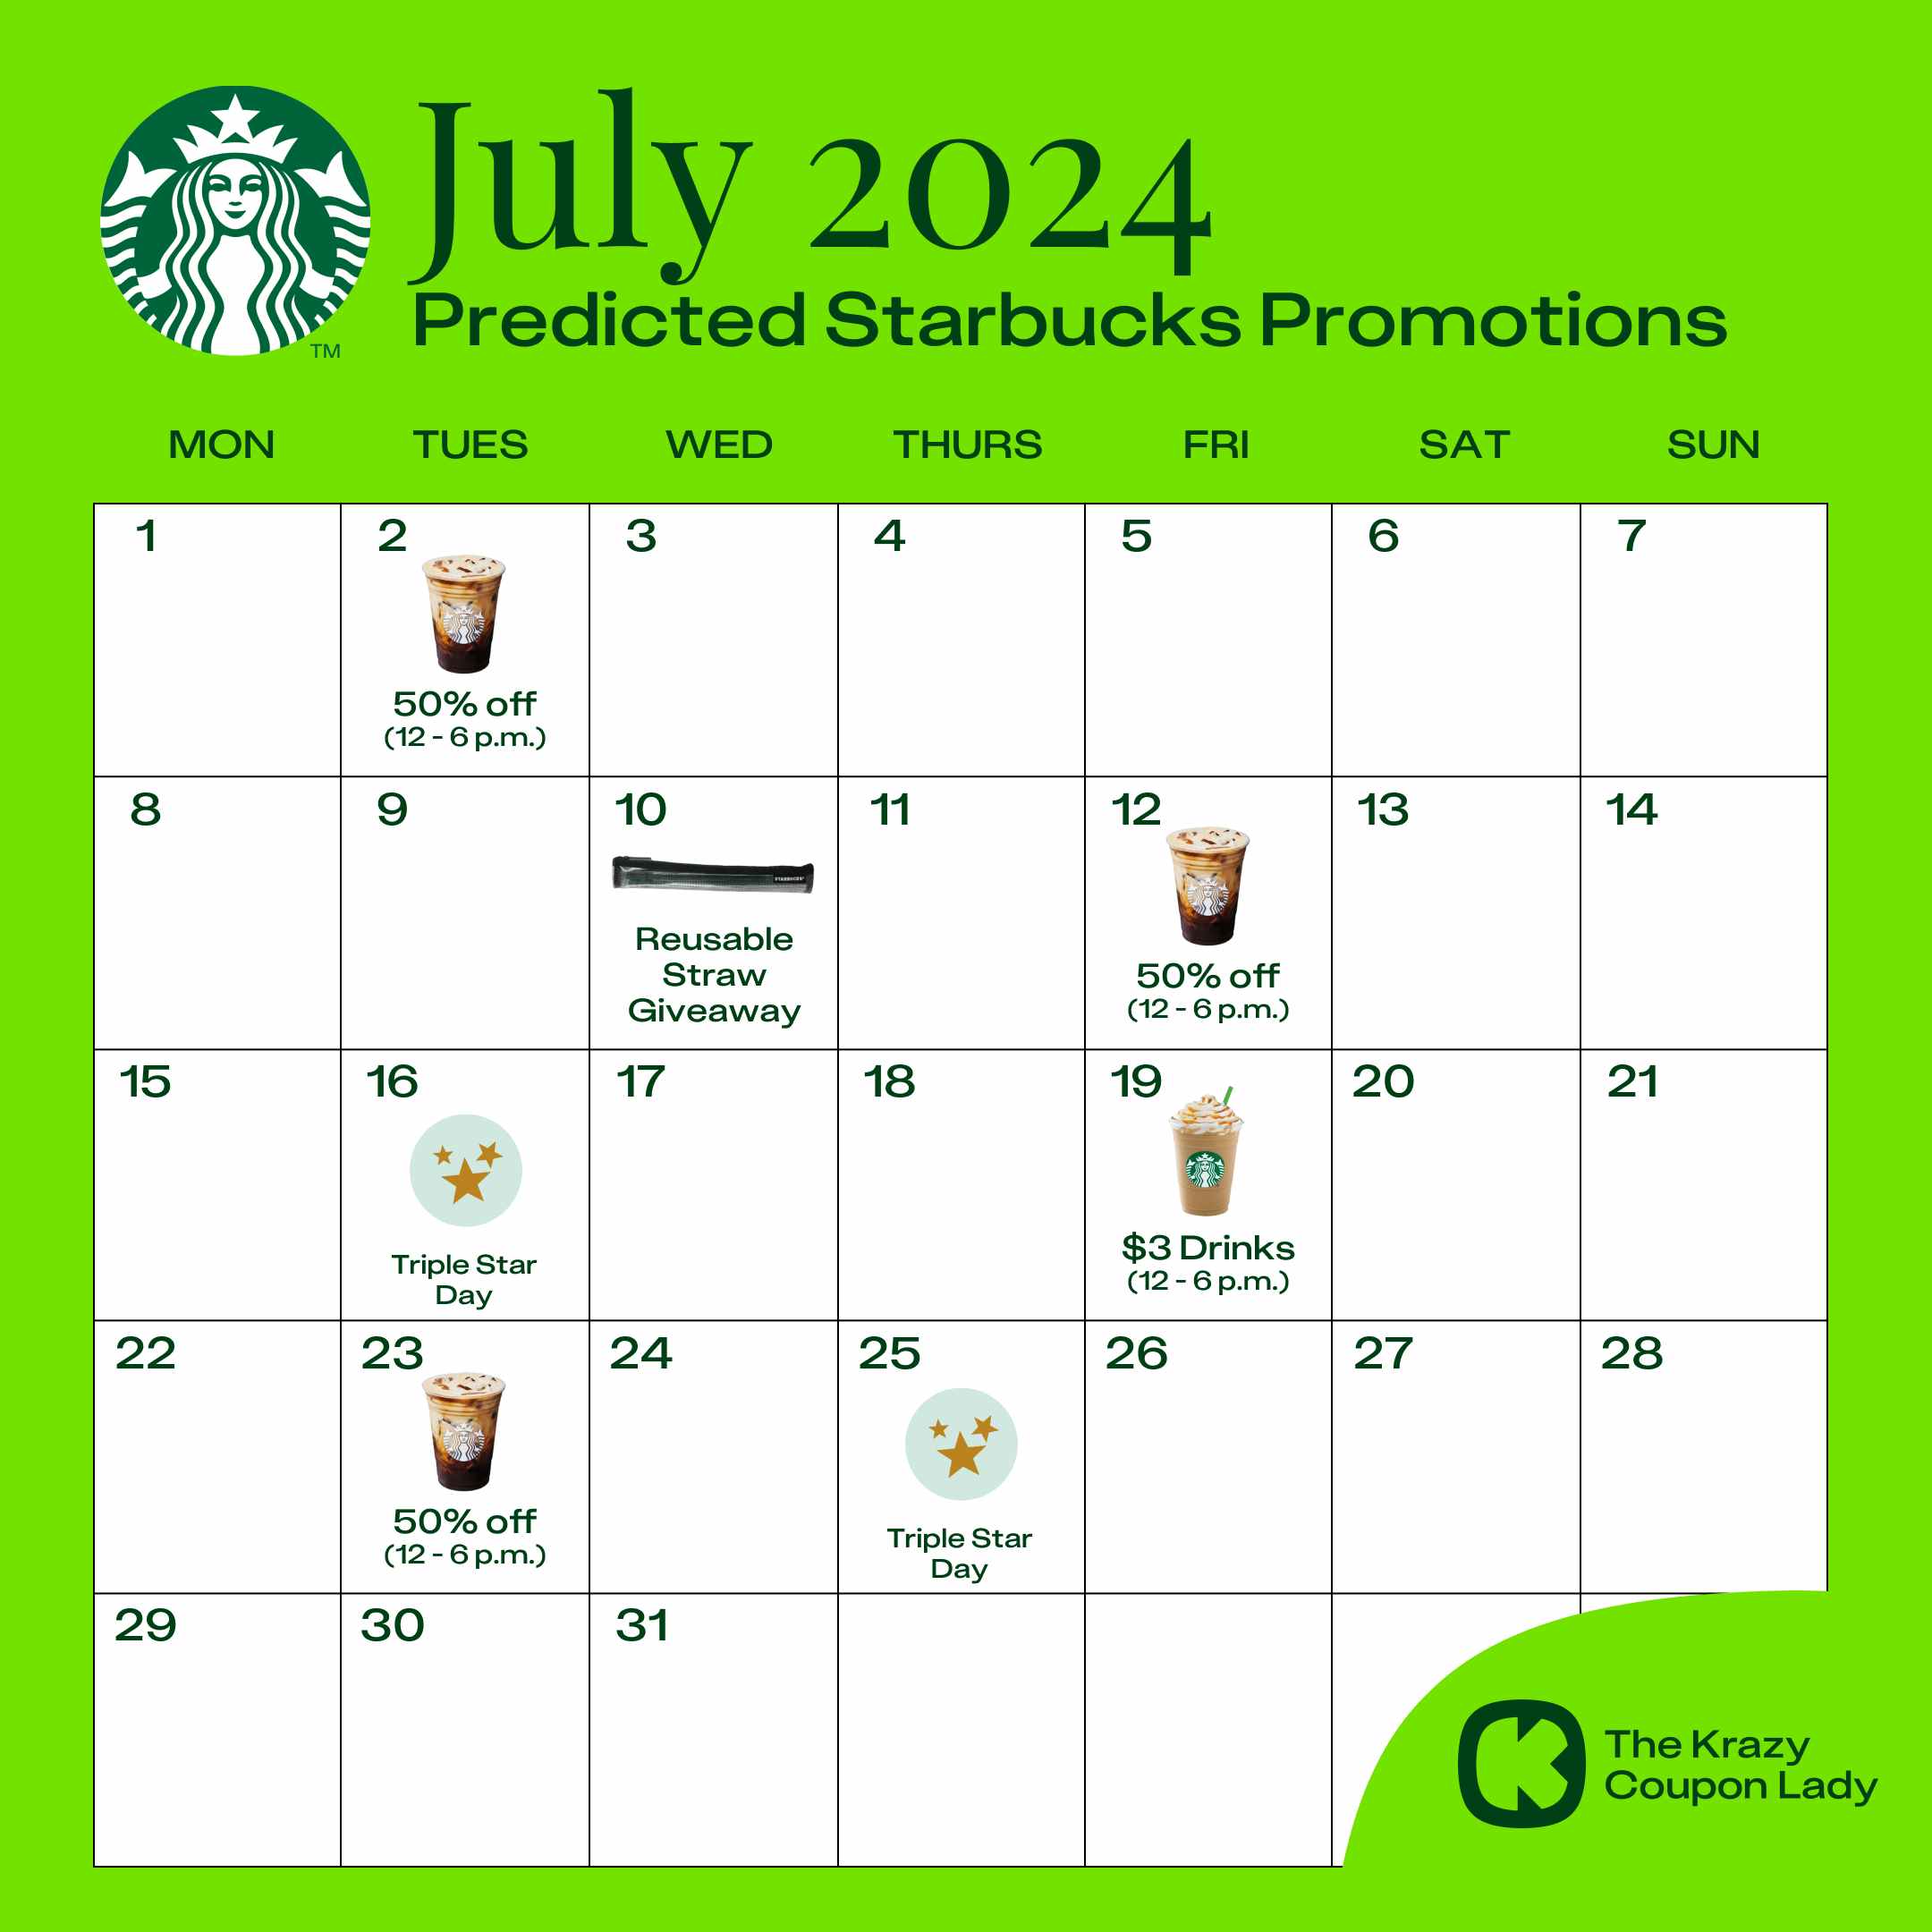 Starbucks-predicted-promotions-july-2024